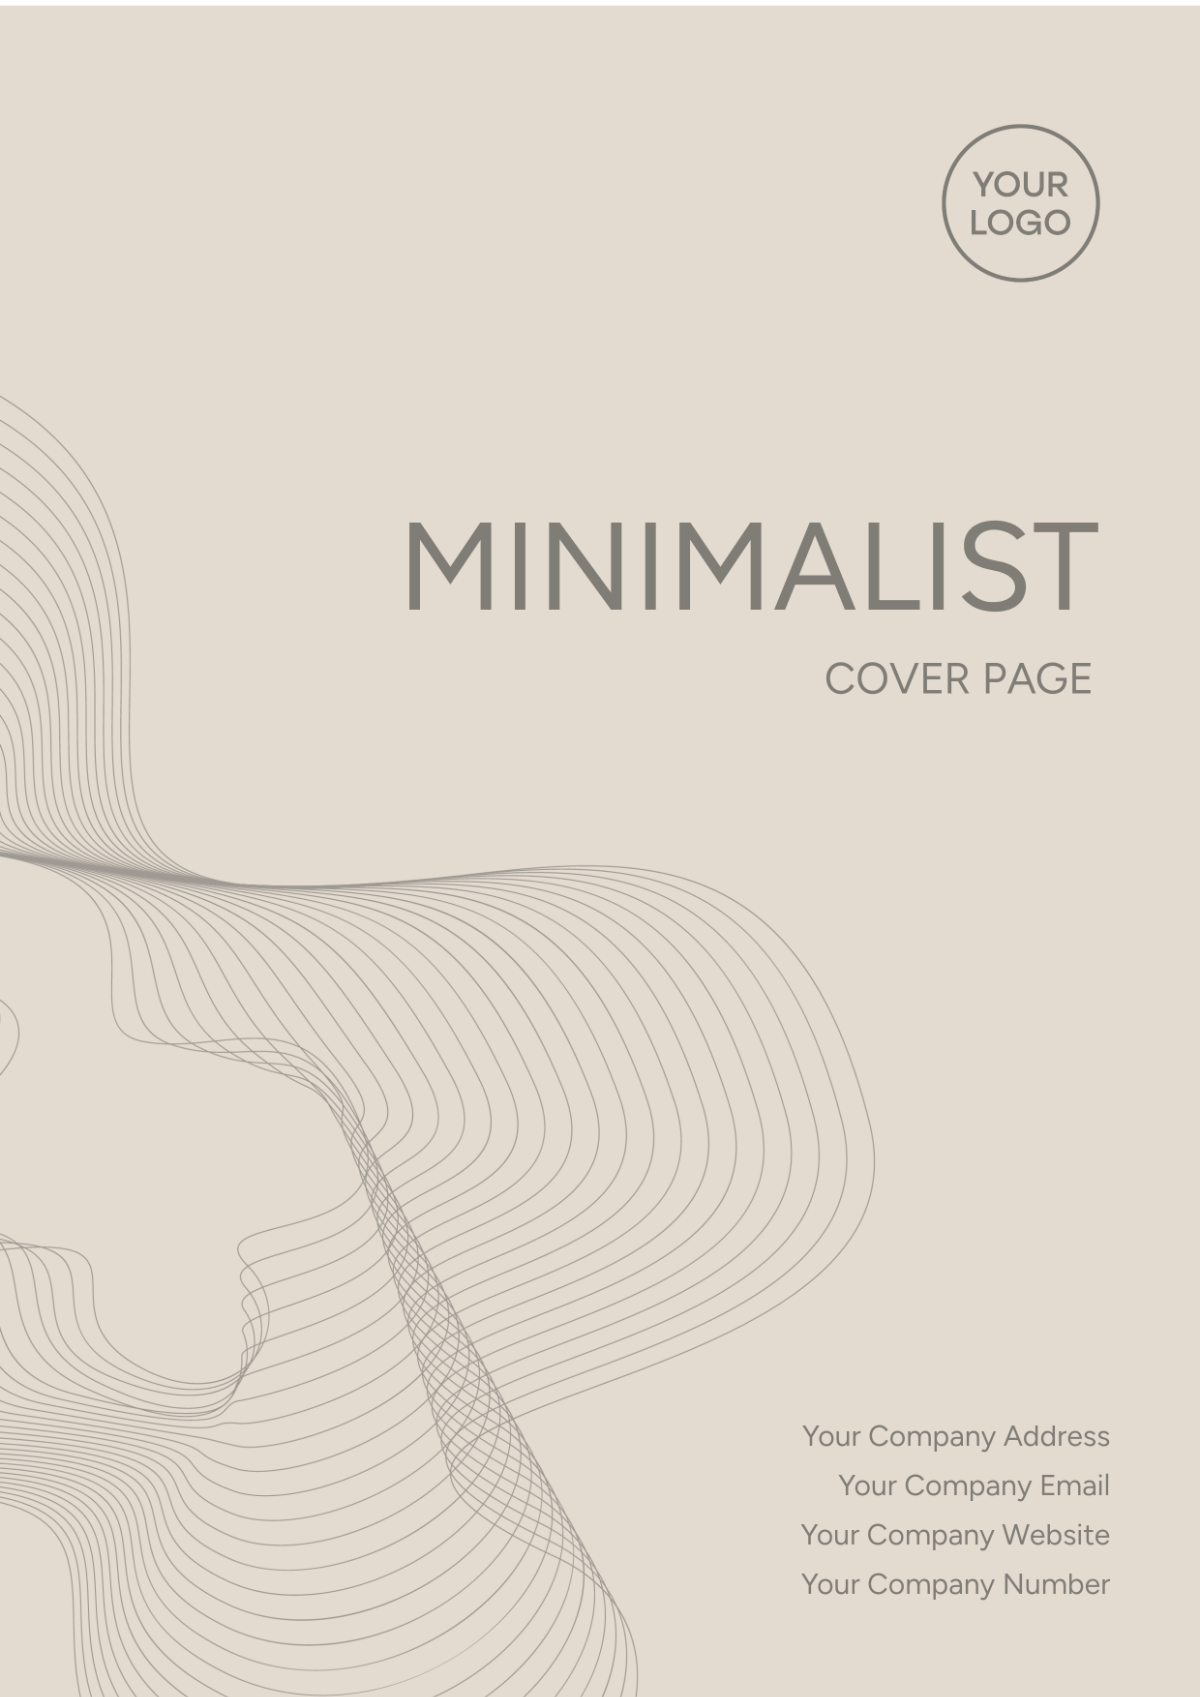 Minimalist Cover Page Image